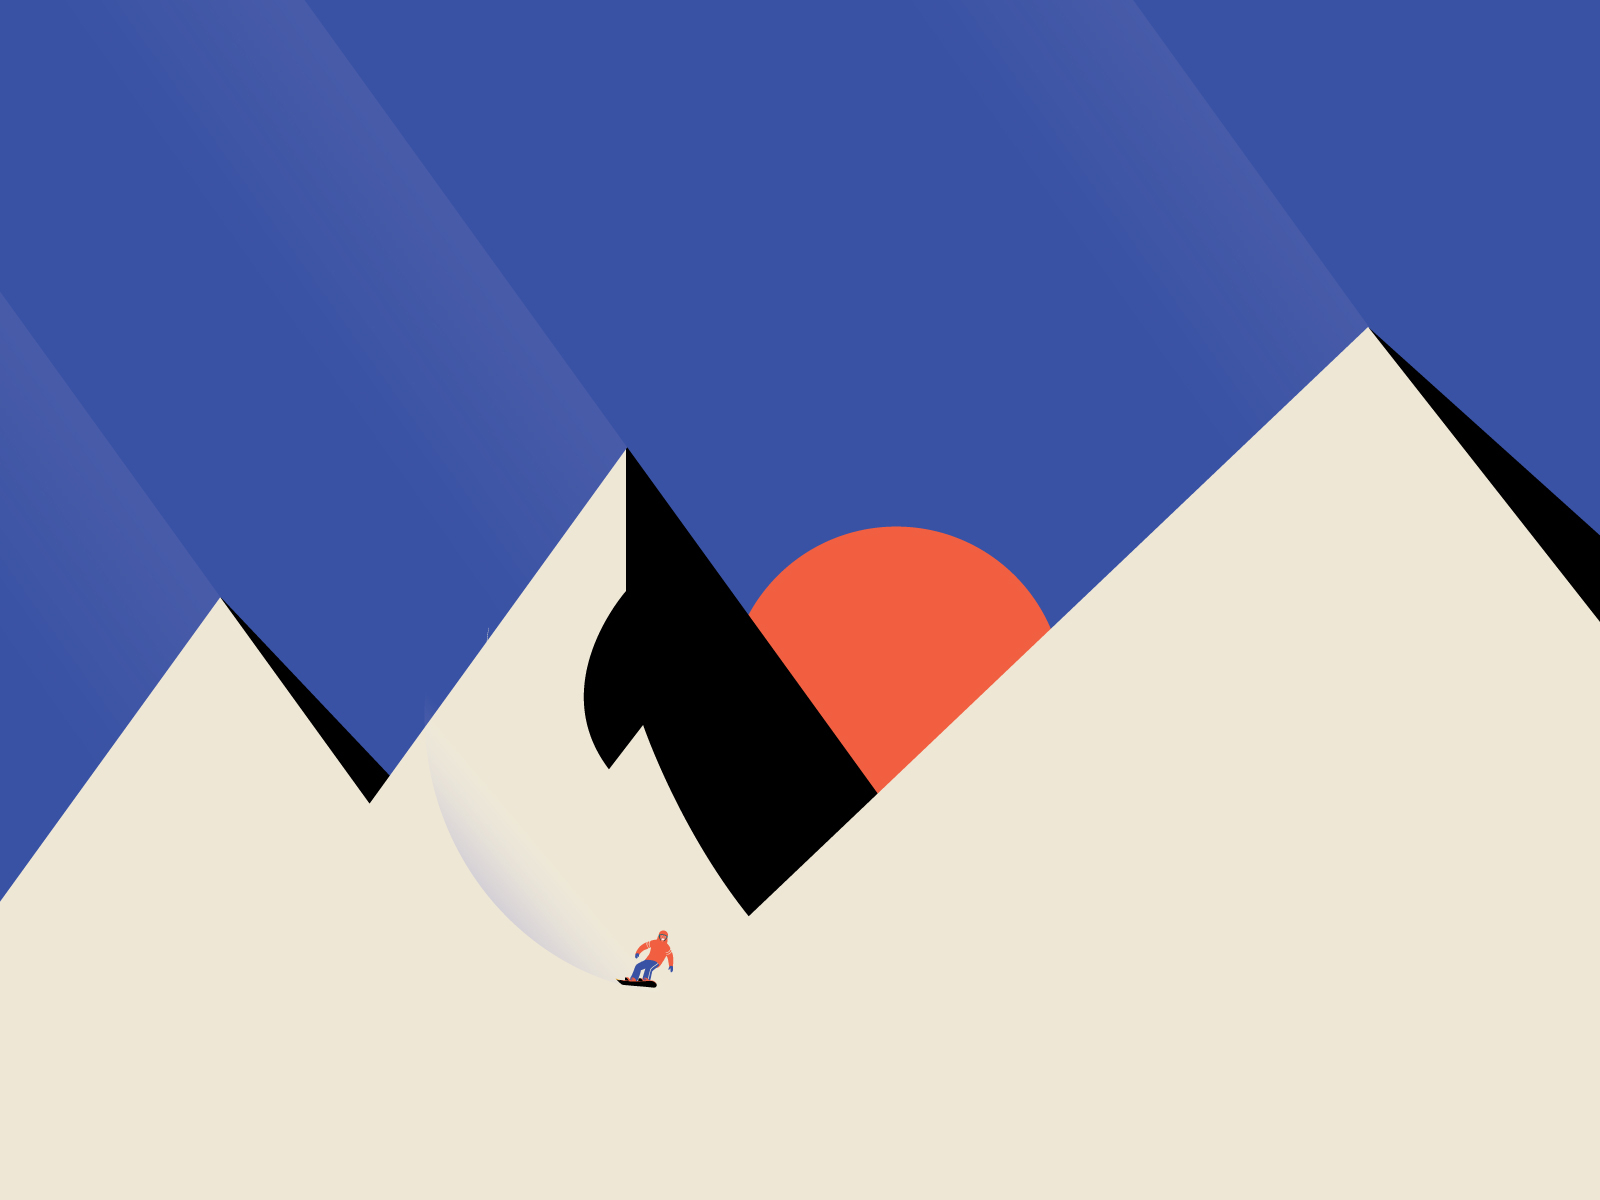 Sunset by Jay Master on Dribbble